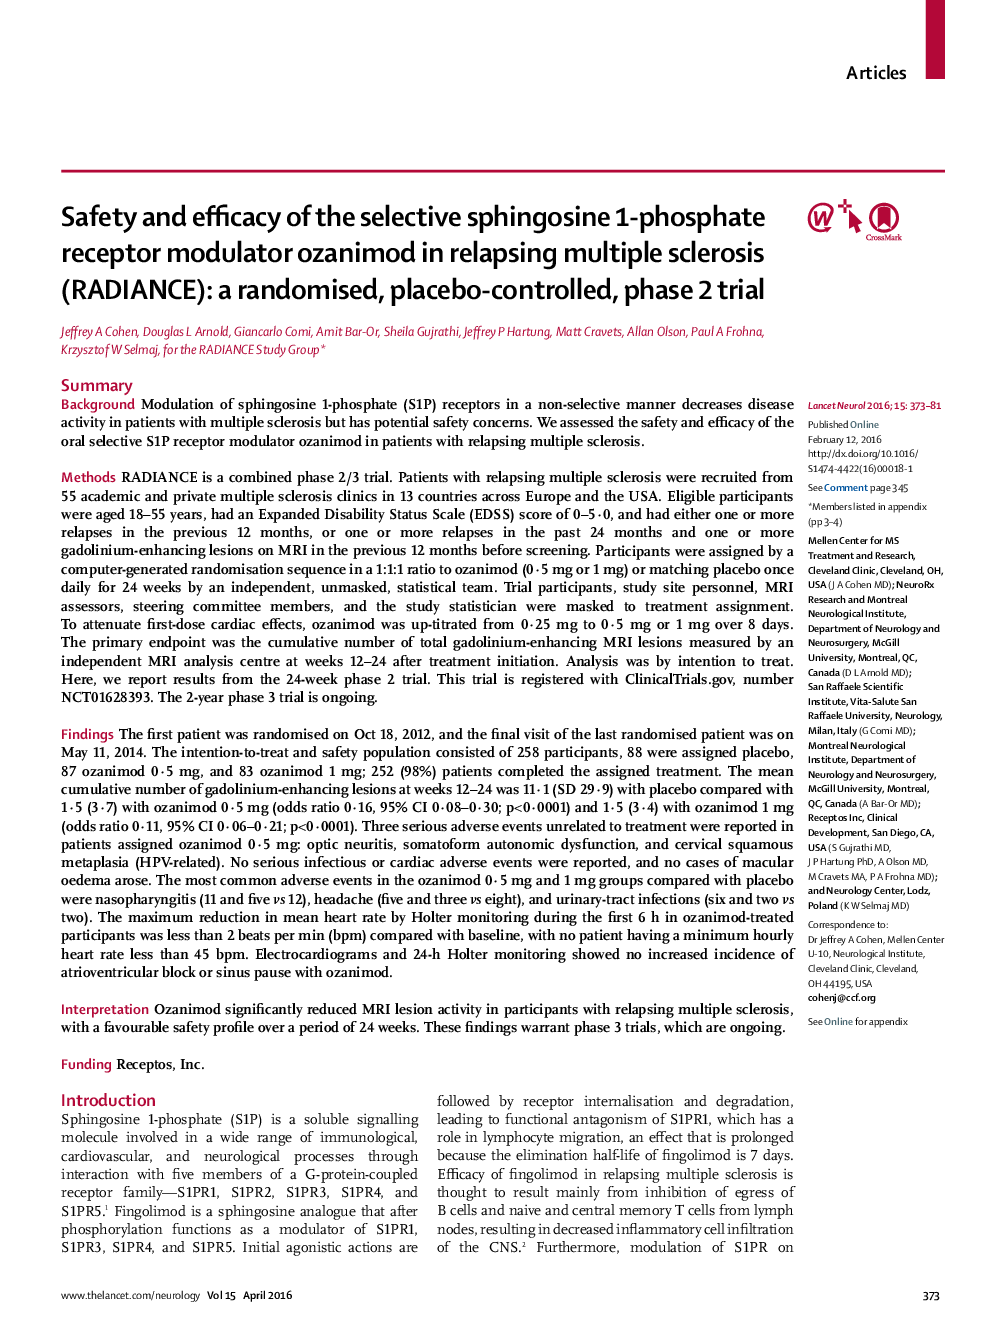 Safety and efficacy of the selective sphingosine 1-phosphate receptor modulator ozanimod in relapsing multiple sclerosis (RADIANCE): a randomised, placebo-controlled, phase 2 trial